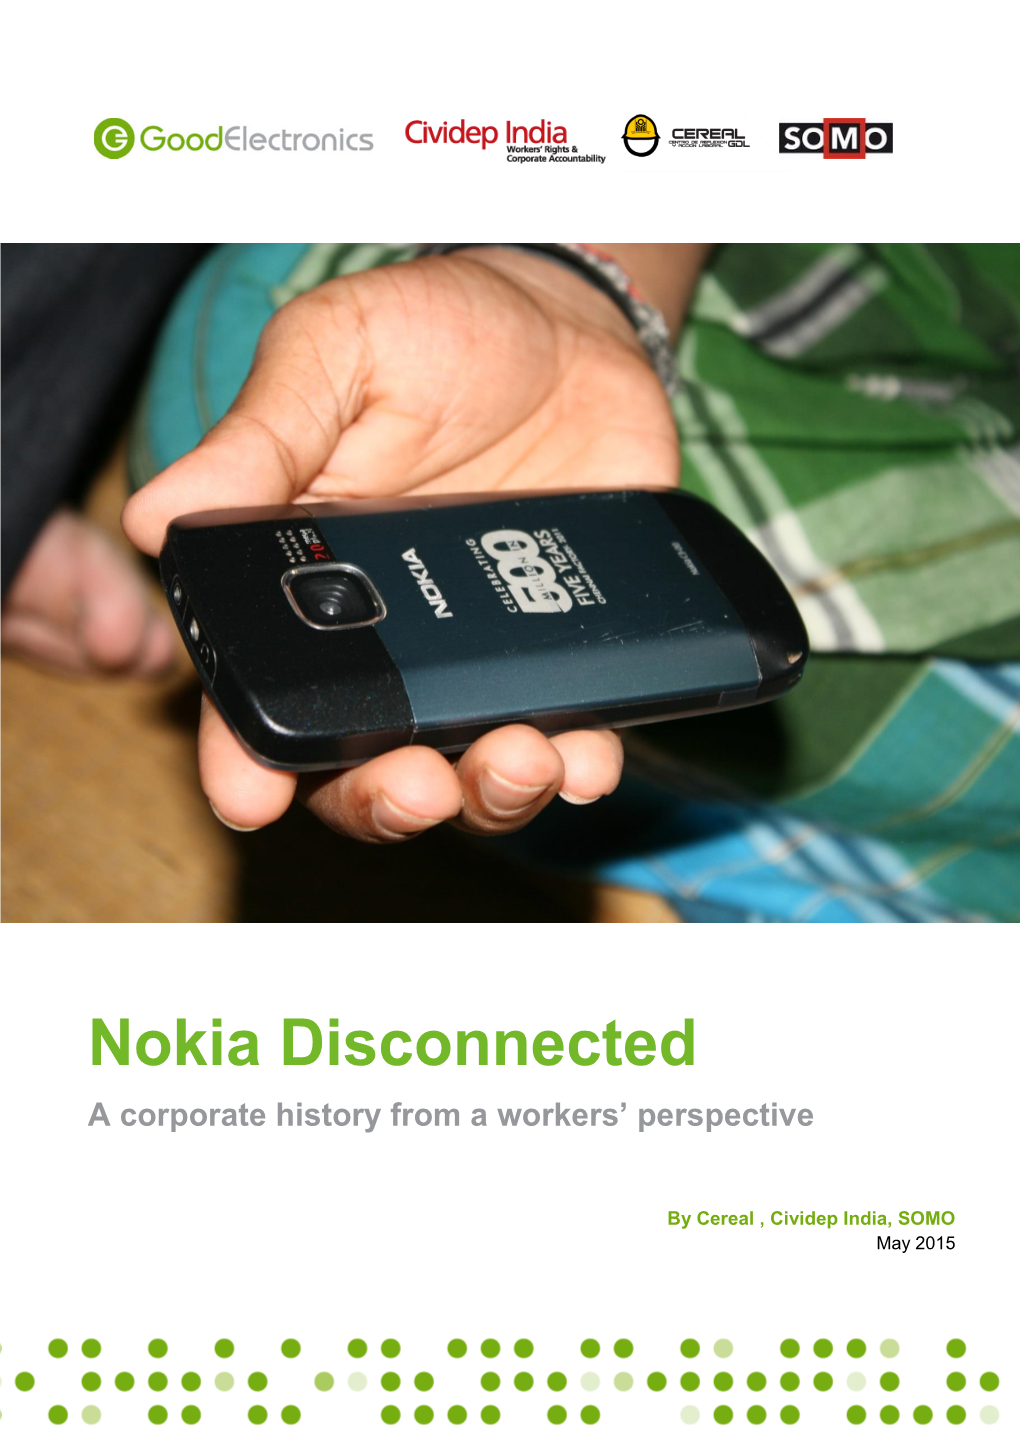 Nokia Disconnected a Corporate History from a Workers’ Perspective